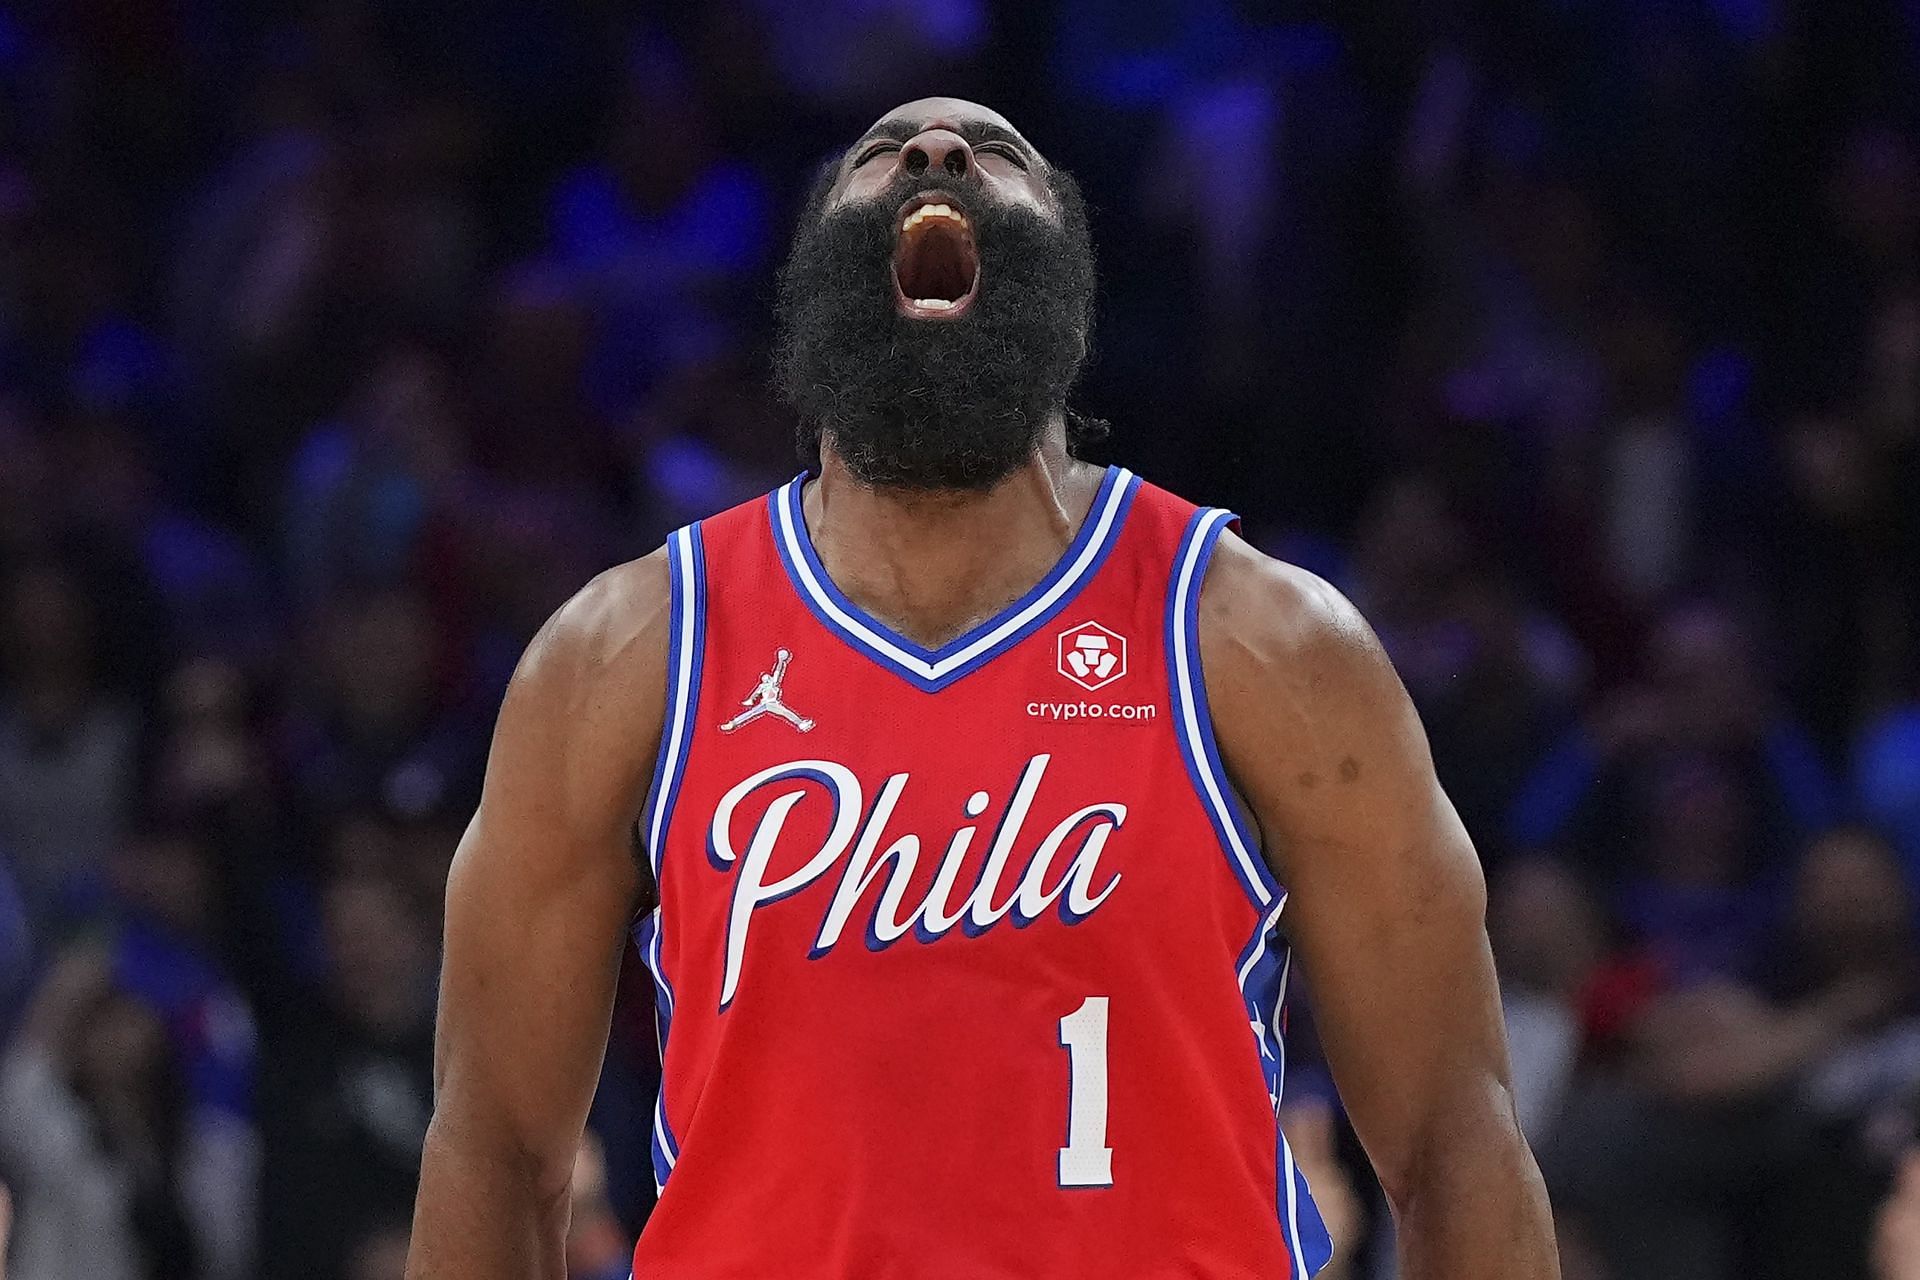 James Harden #1 of the Philadelphia 76ers reacts against the Miami Heat in the second half during Game Four of the 2022 NBA Playoffs Eastern Conference Semifinals at the Wells Fargo Center on May 8, 2022 in Philadelphia, Pennsylvania.